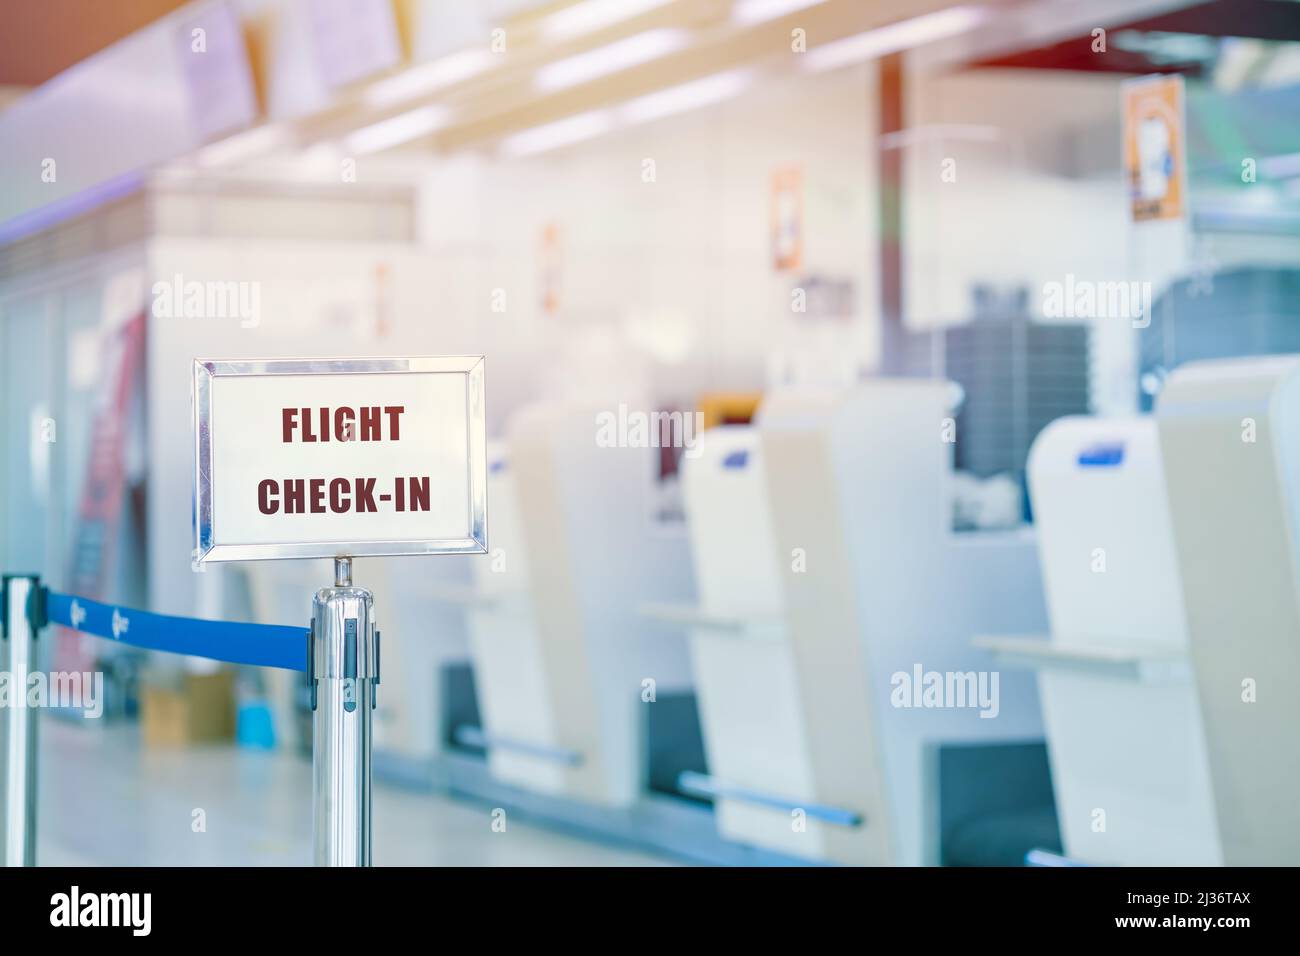 Airline flight counter check-in gate in Airport terminal international departure area. Stock Photo